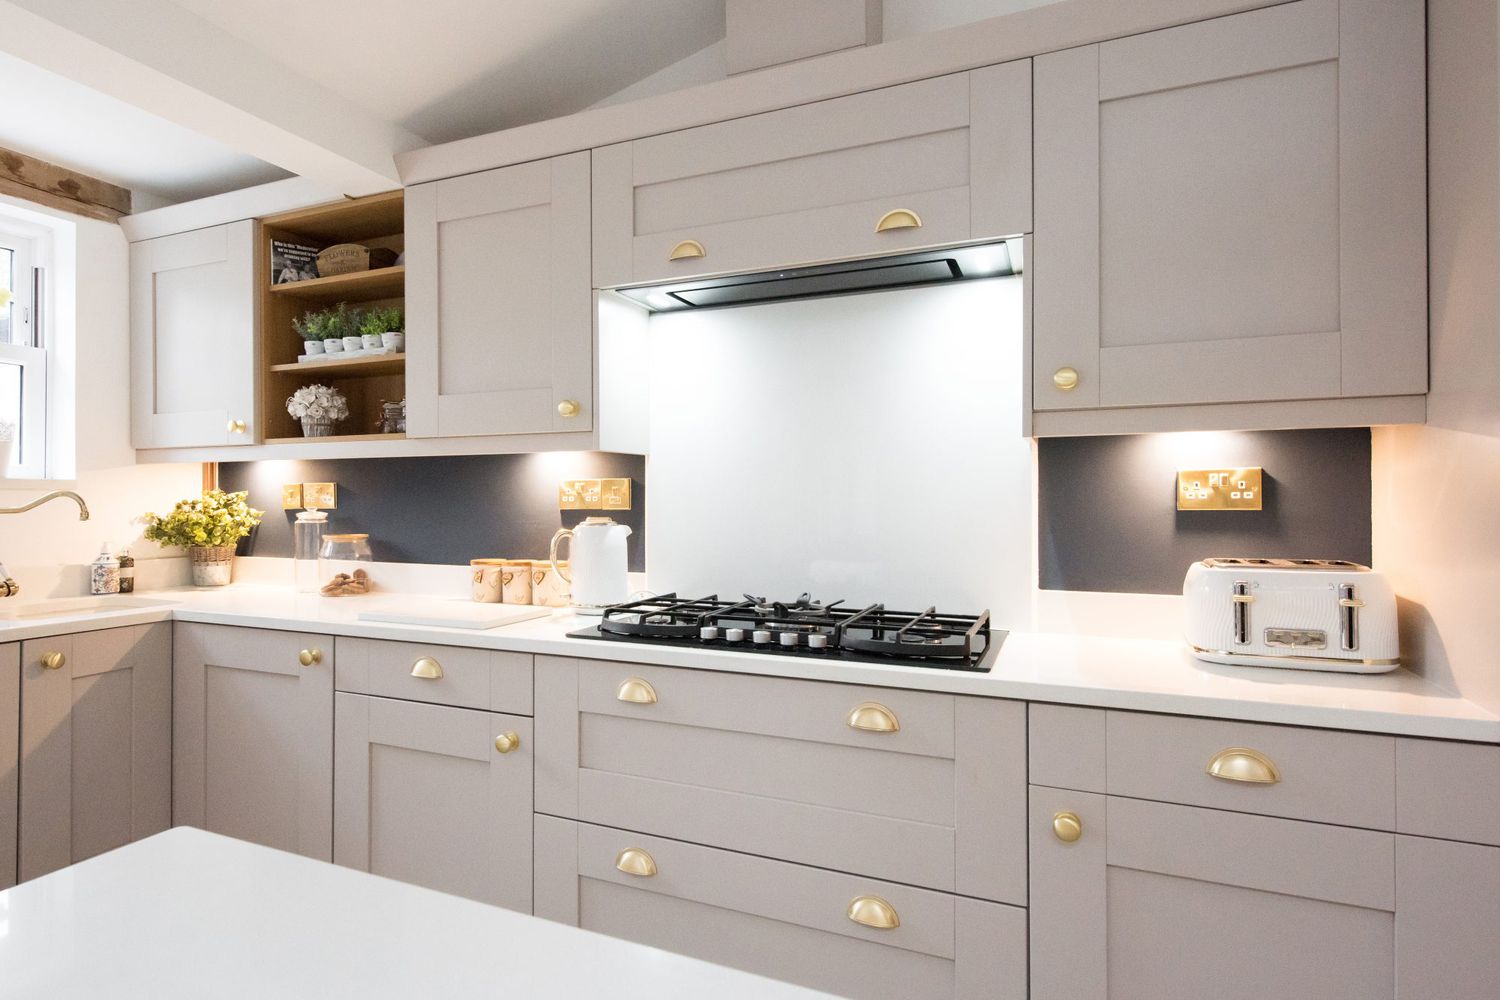 An interior view of a taupe, champagne coloured fitted kitchen diner with gold handles, quartz island, gas stove, toaster